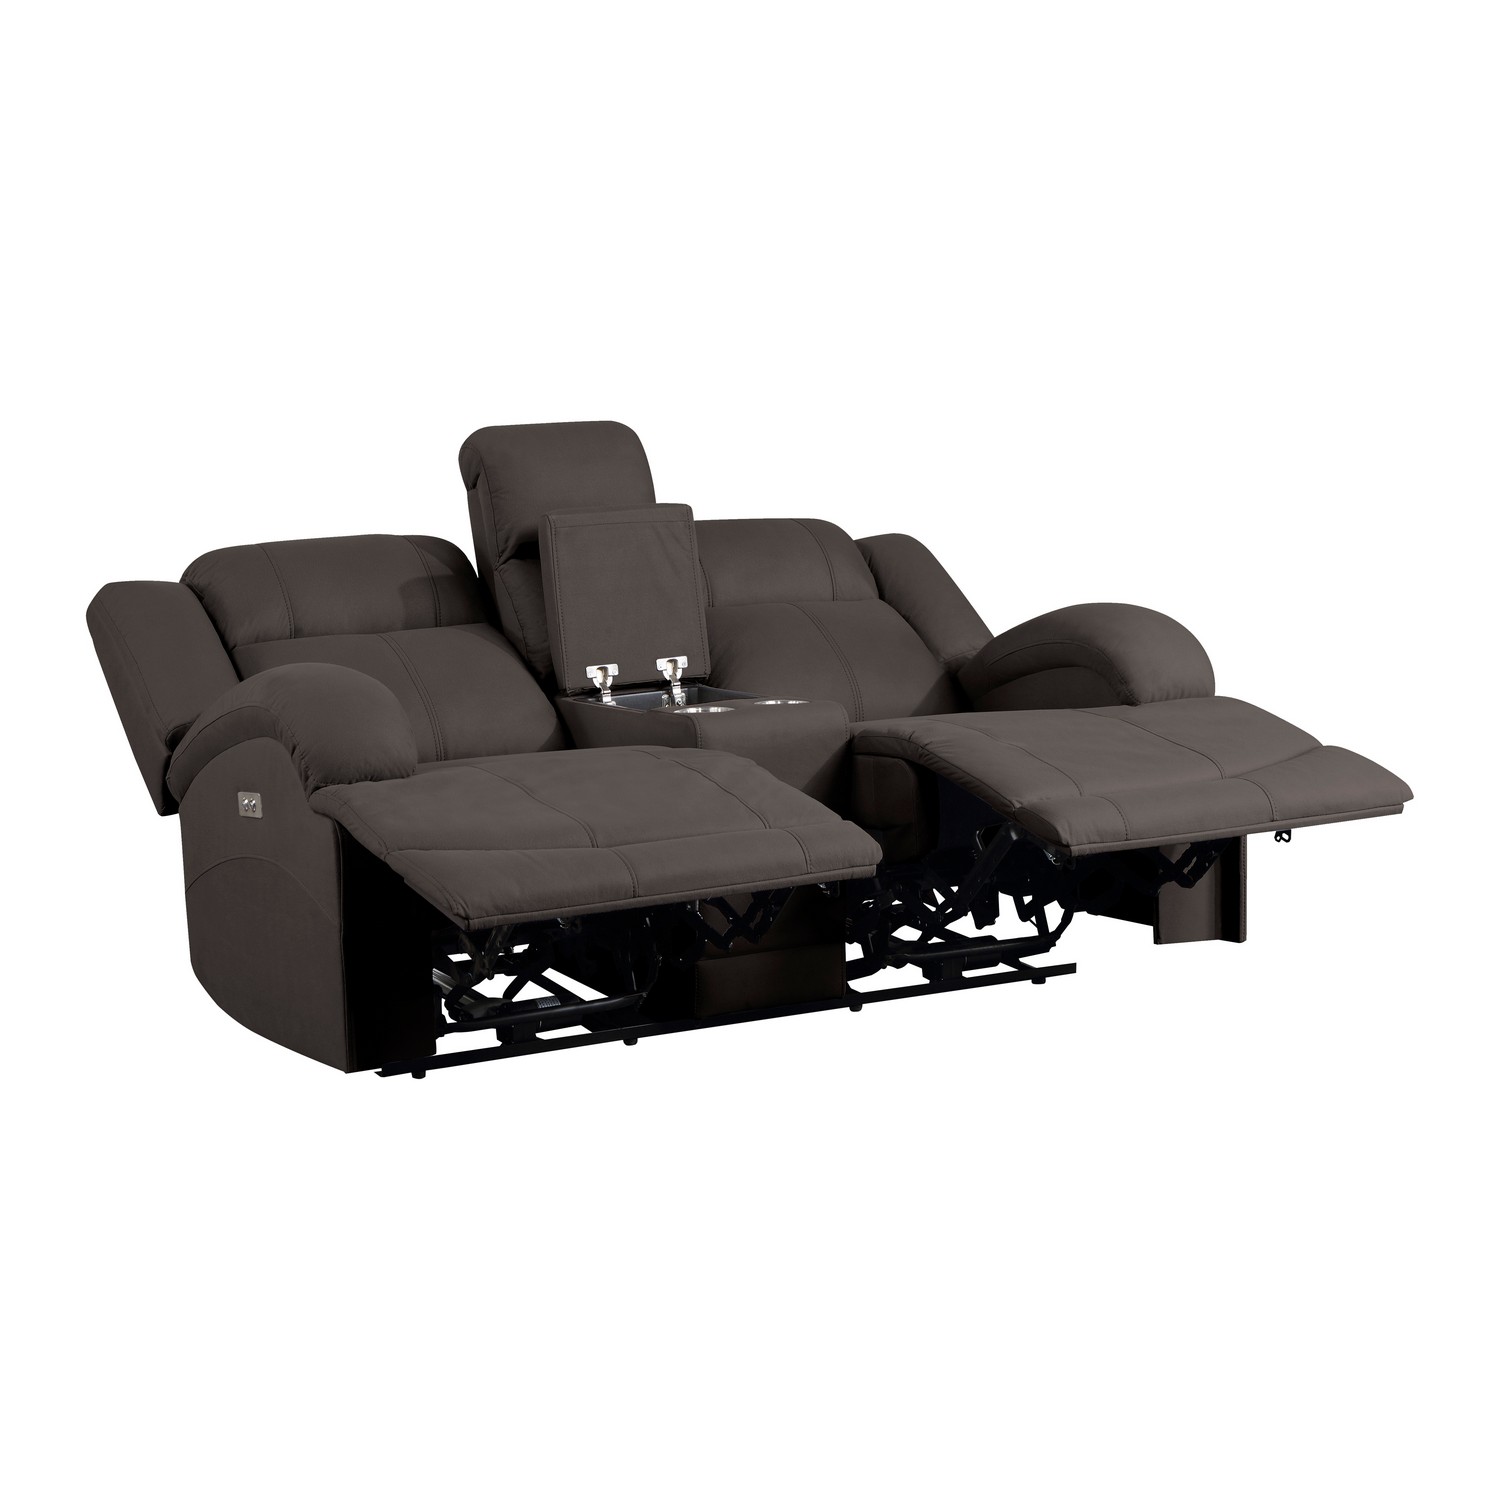 Homelegance Camryn Power Double Reclining Love Seat - Chocolate